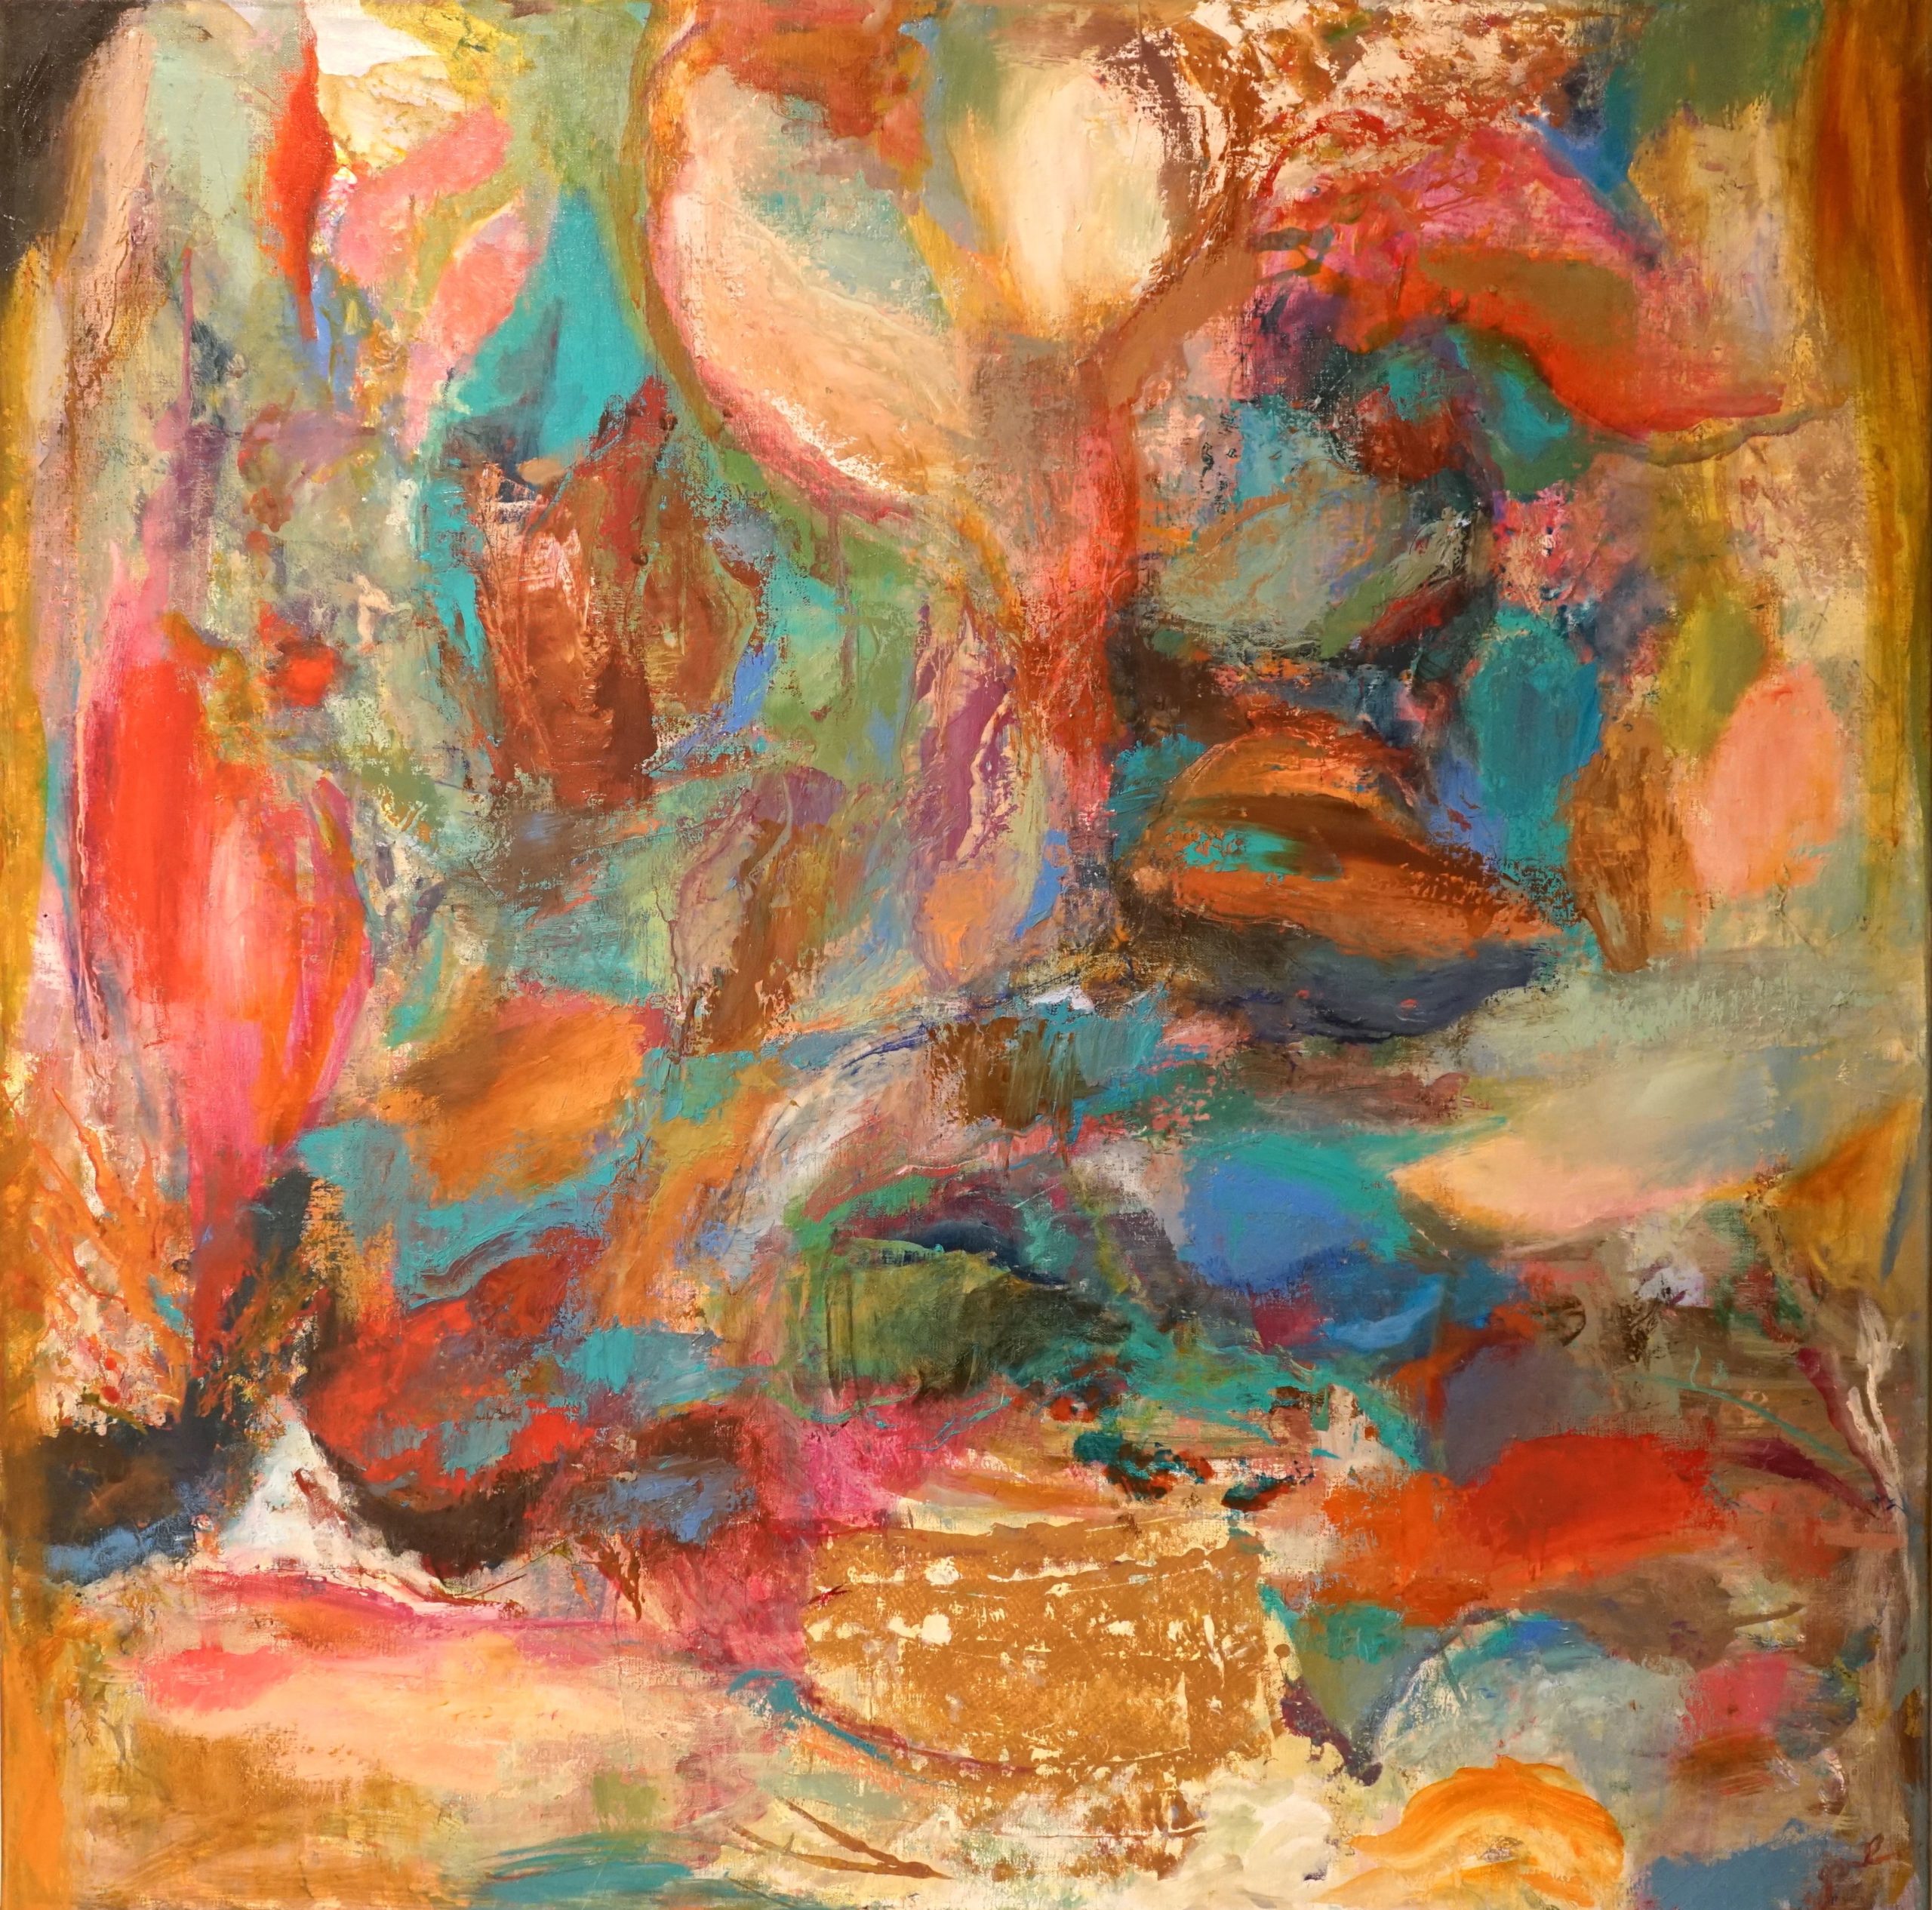 Persian Rhythms by Judy Keene, Oil and Mixed Media on linen, 30 x 30 at Craven Allen Gallery